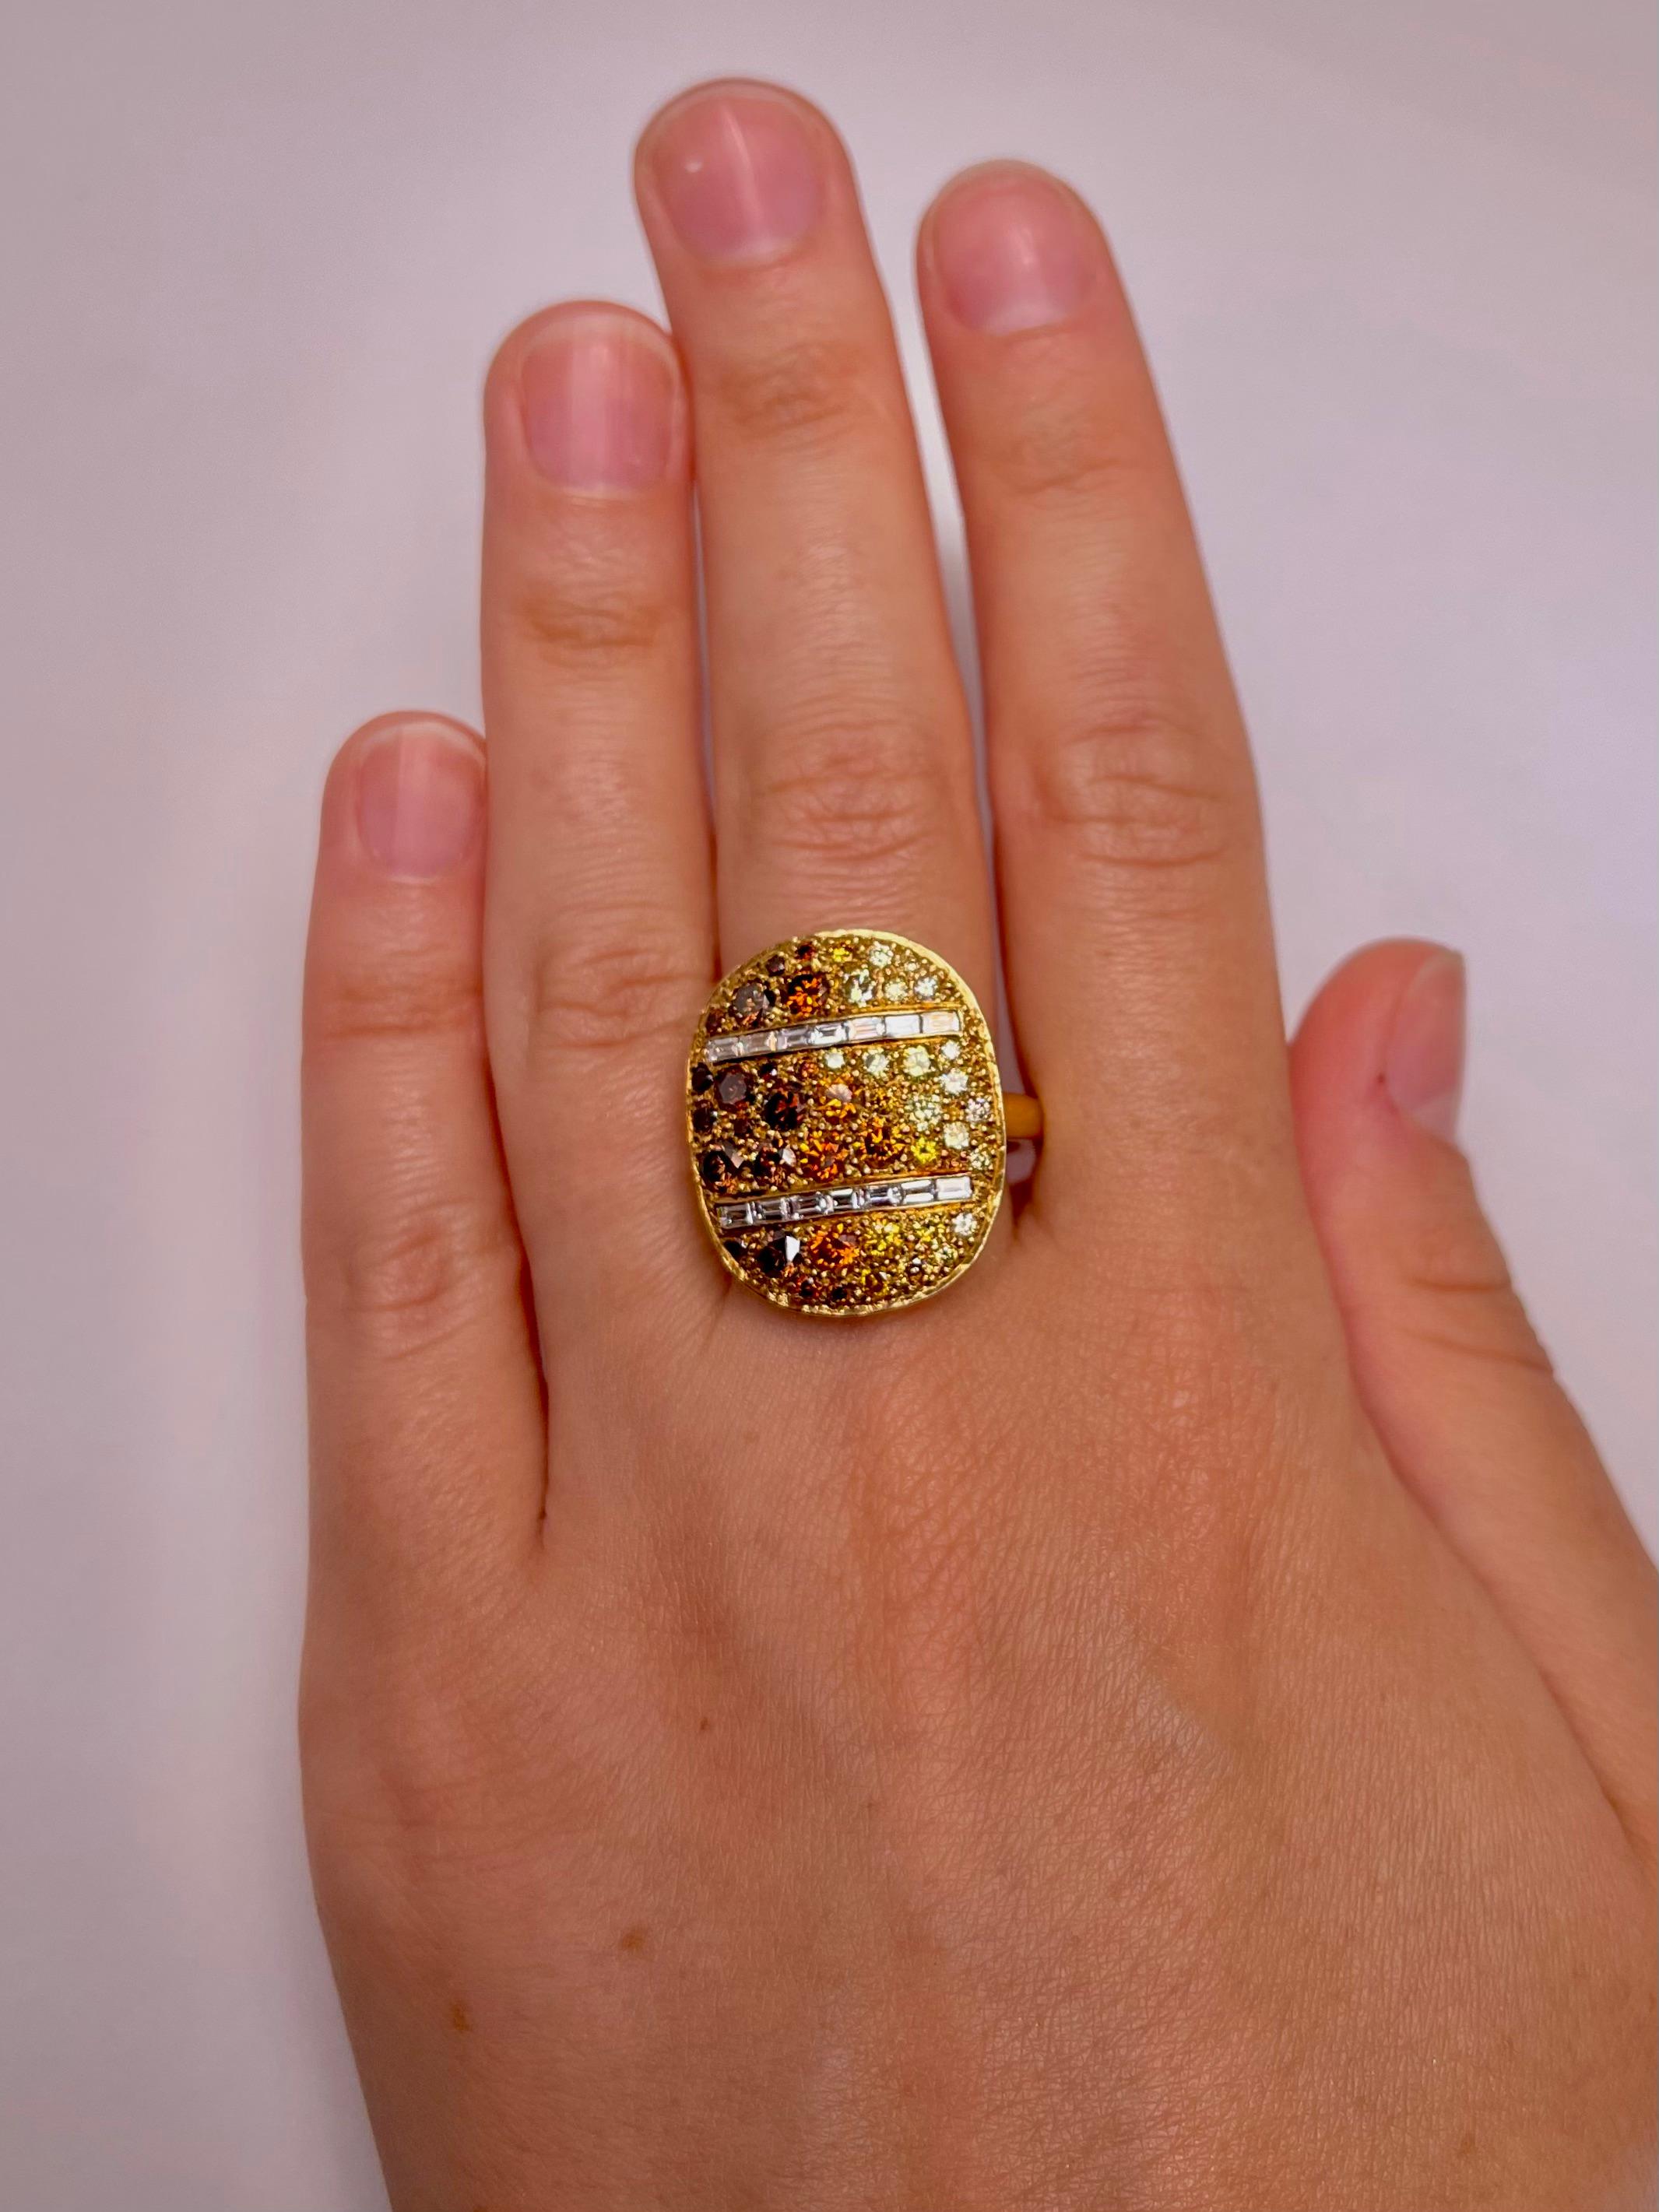 Oval design natural fancy earth tone diamond pave and two bands of channel set baguettes. Yellow, Brown, Orange and White Fancy colored VVS-SI1 diamonds. Set in 18K Yellow gold. Finger size: 6. 

Proudly crafted by SIMON ARDEM artisans in New York